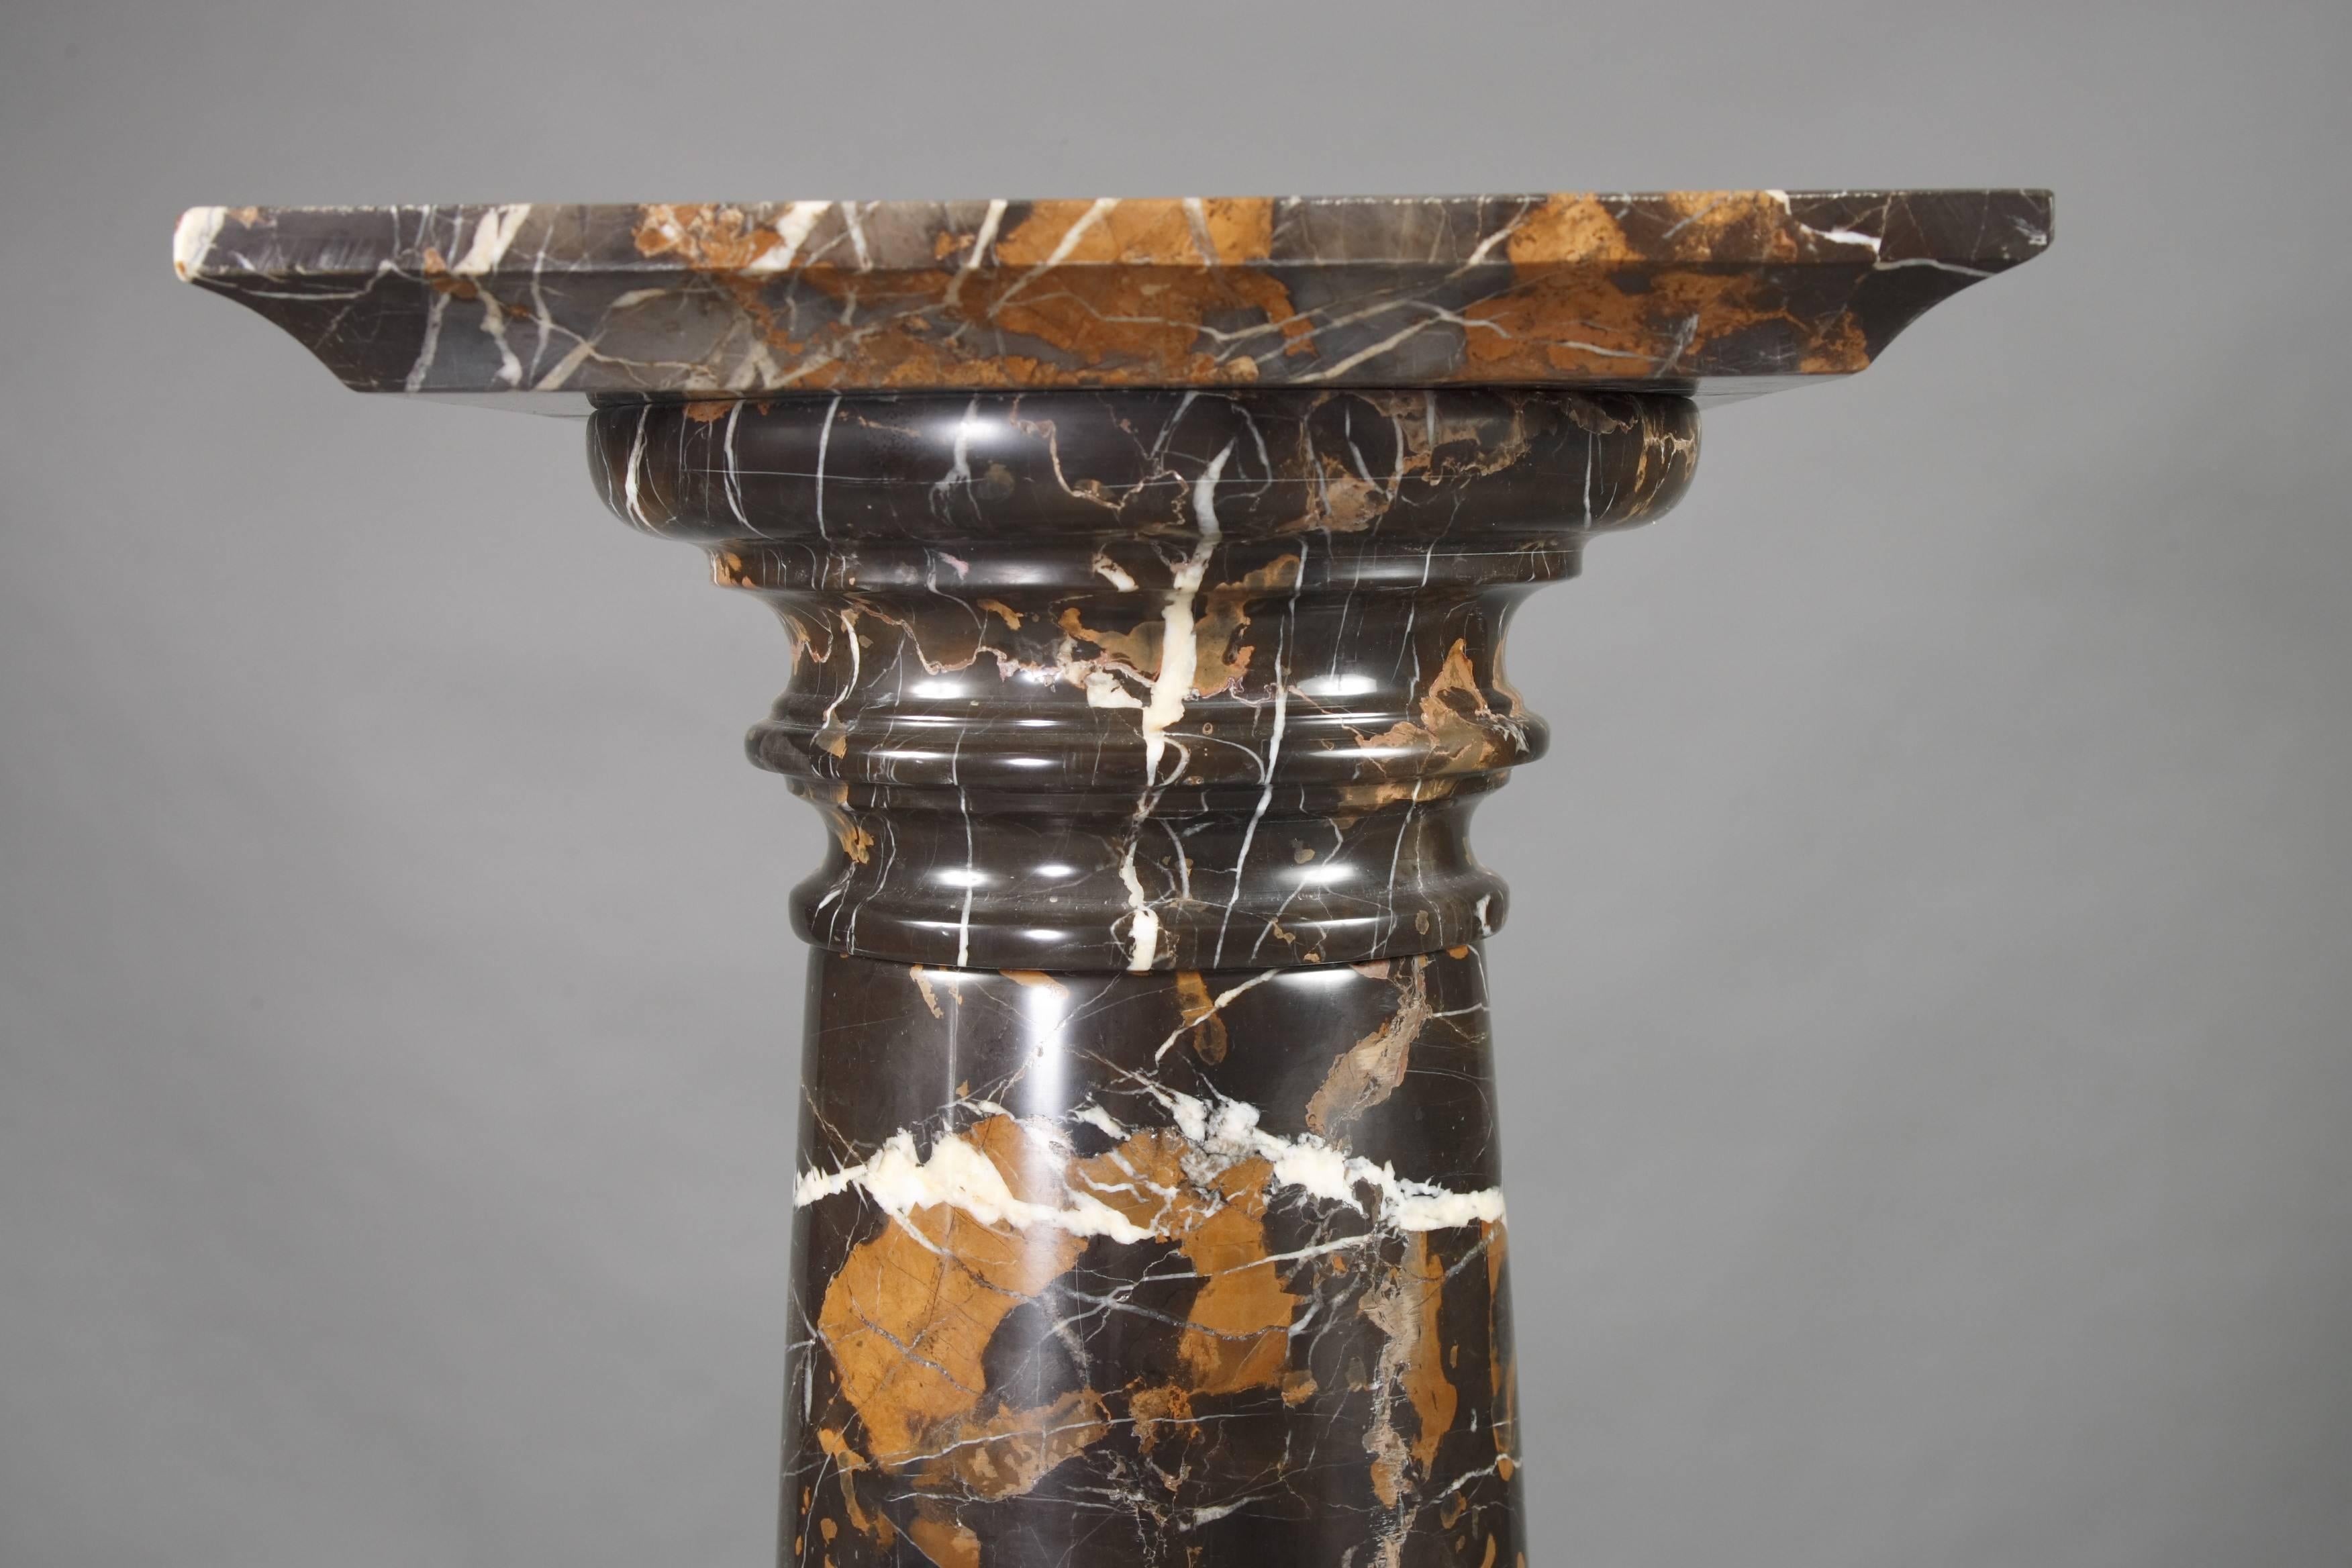 Black marble with grey-white grain. Stepped round foot in distended shank. Ovoider body, slightly rising neck and broad arched edge.
This column can be divided in five pieces.

Exactly made according to our original (from the time).